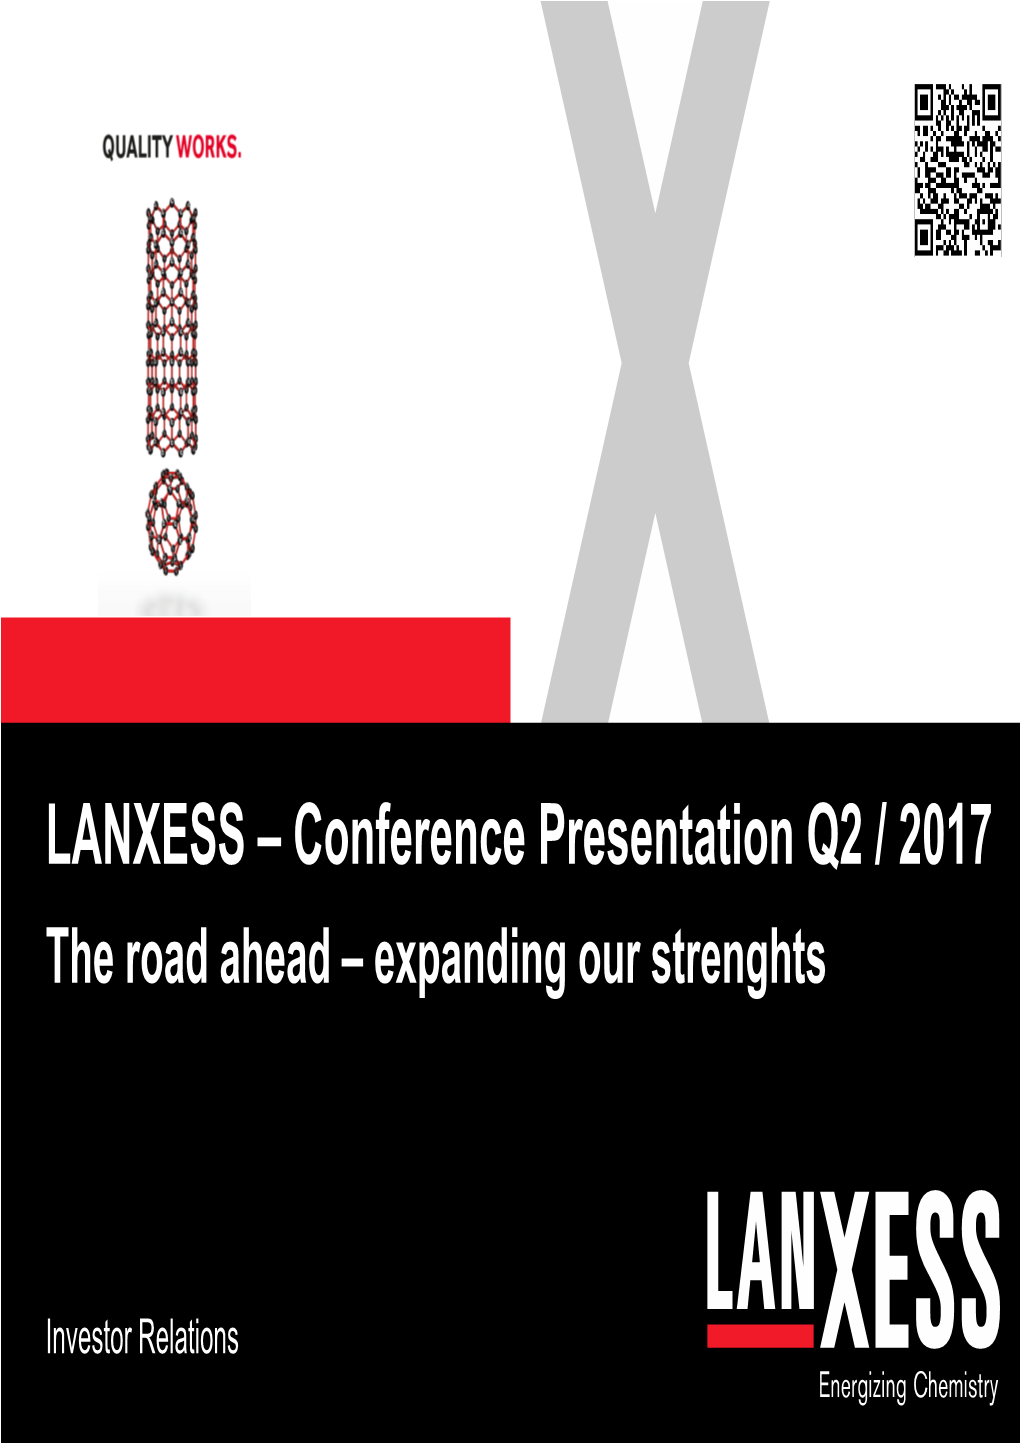 Conference Presentation Q2 / 2017 the Road Ahead – Expanding Our Strenghts